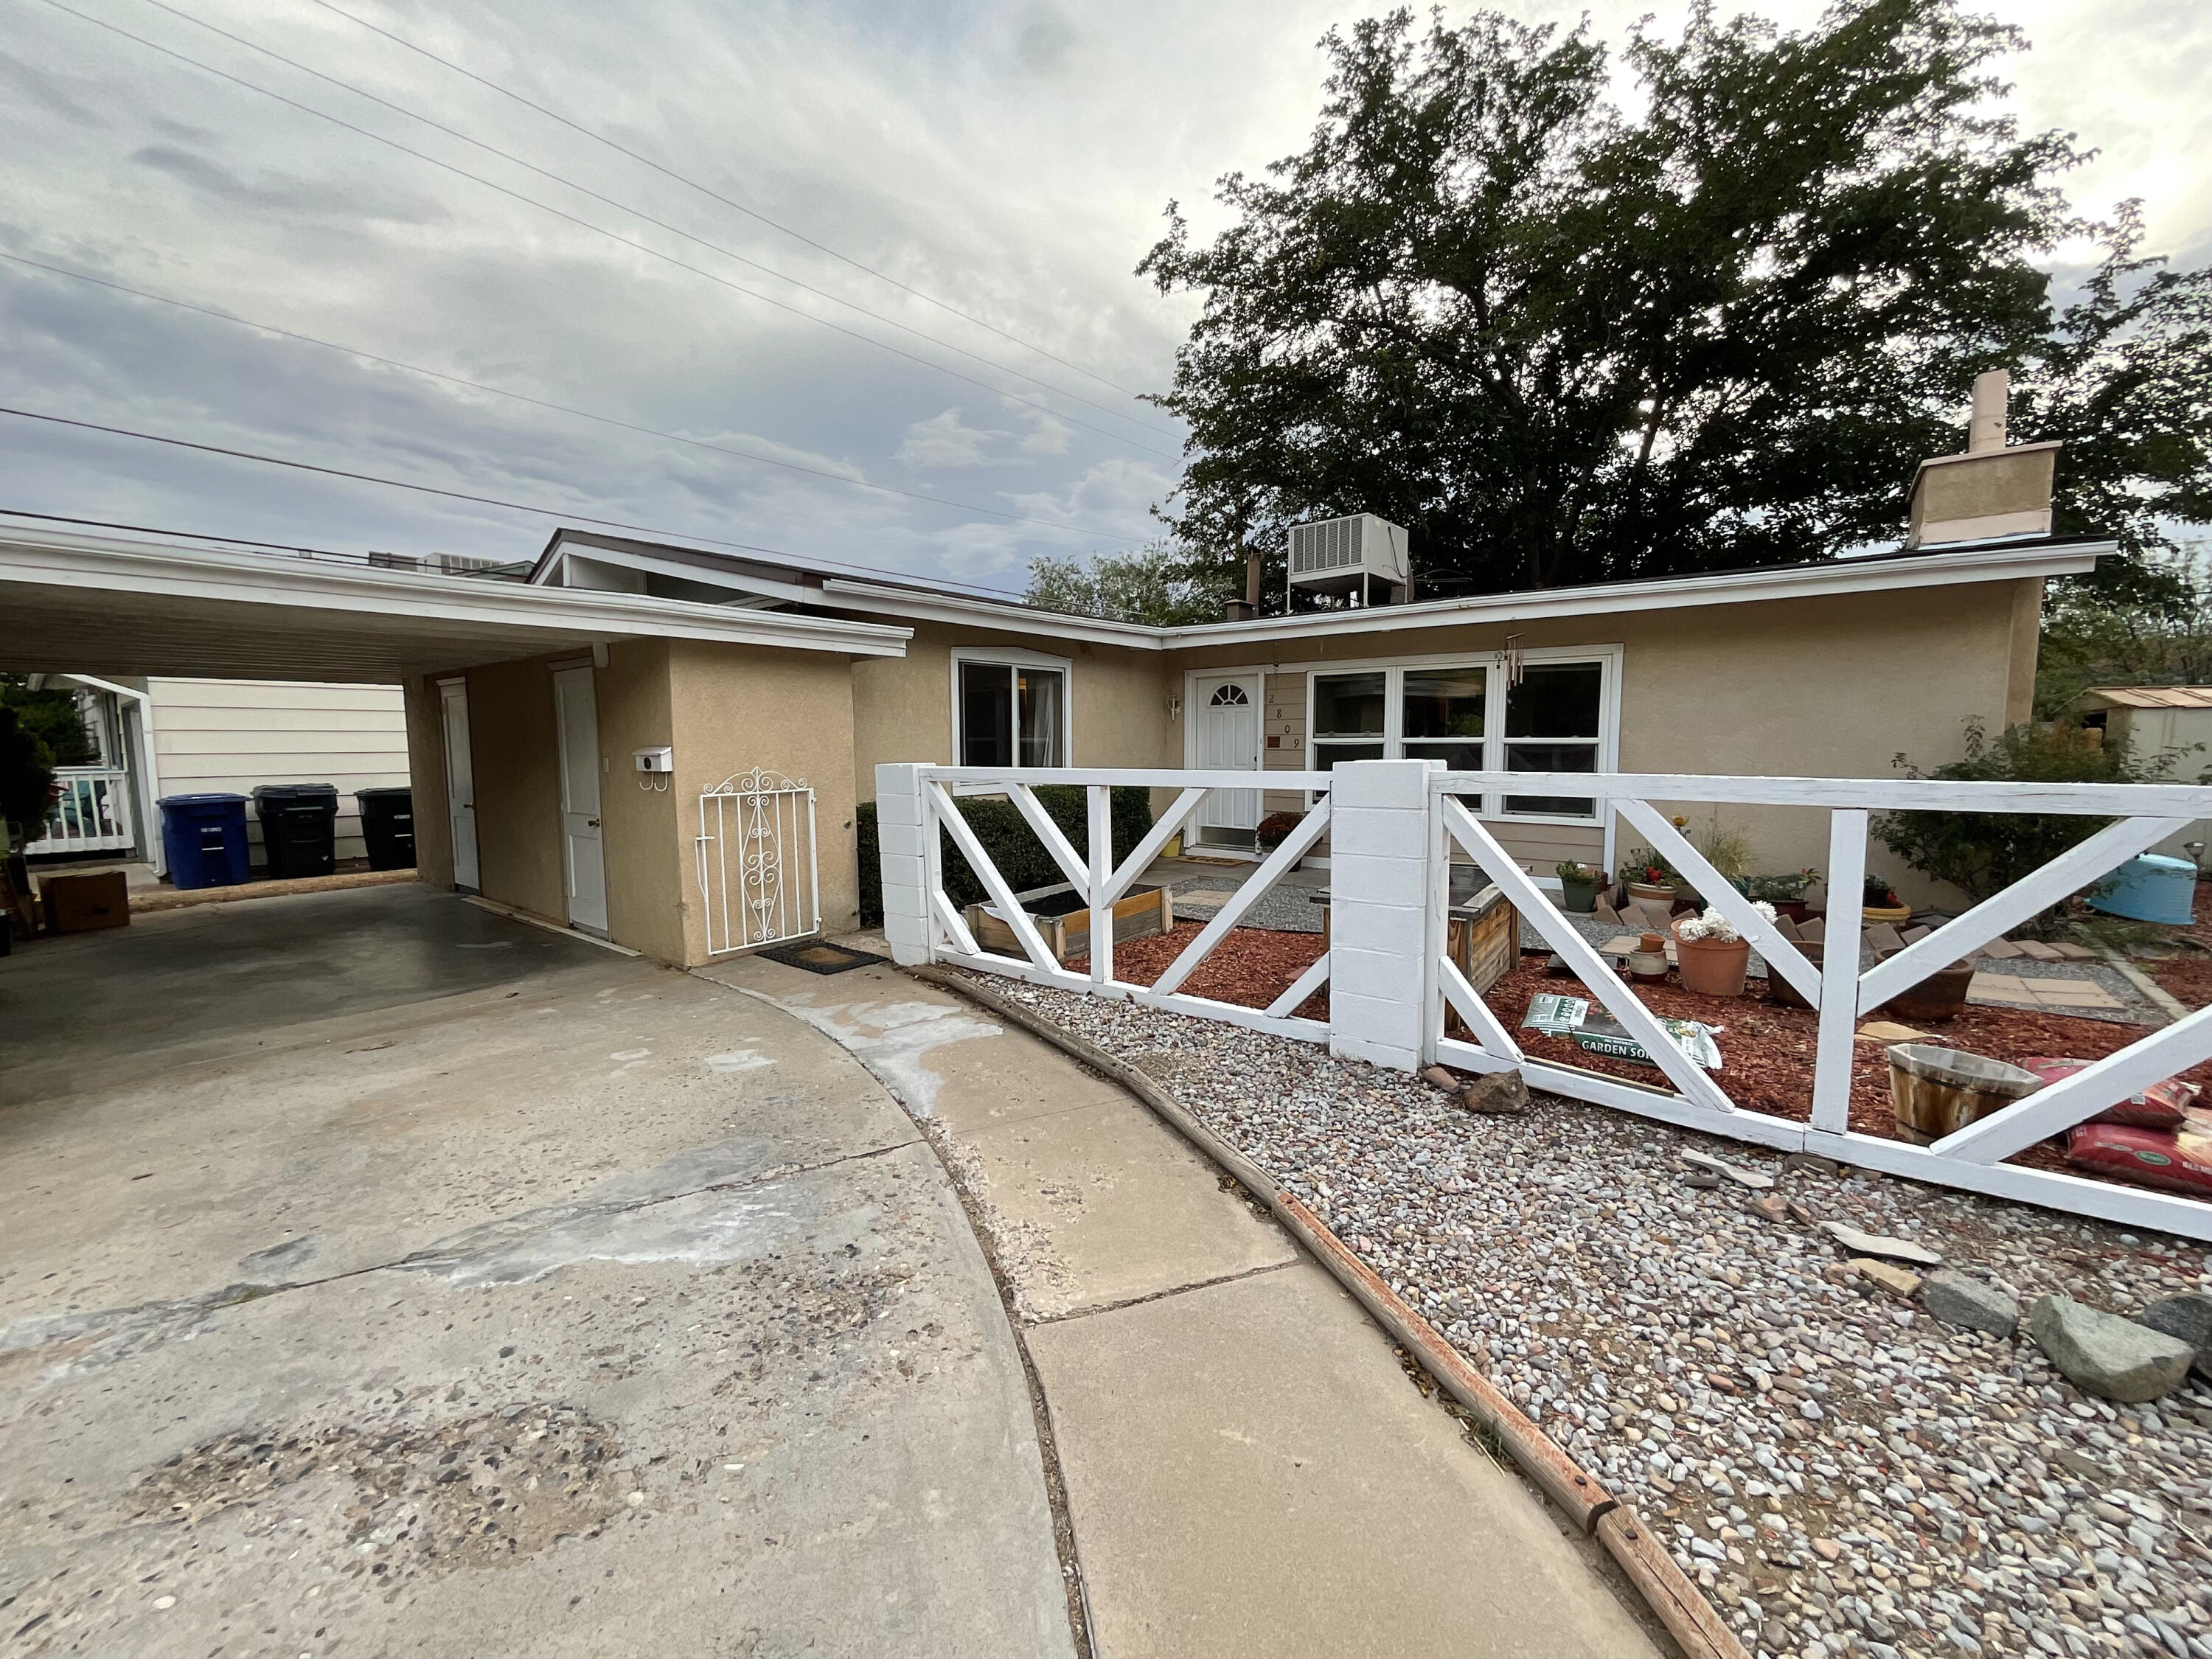 This beautiful 1-story home located in a quiet NE neighborhood close to schools and a park offers 3 bedrooms, 2 baths, and an open concept living room, kitchen and dining area!  It has newer kitchen appliances a huge, landscaped front yard with a cute and cozy courtyard, extra storage and much more!